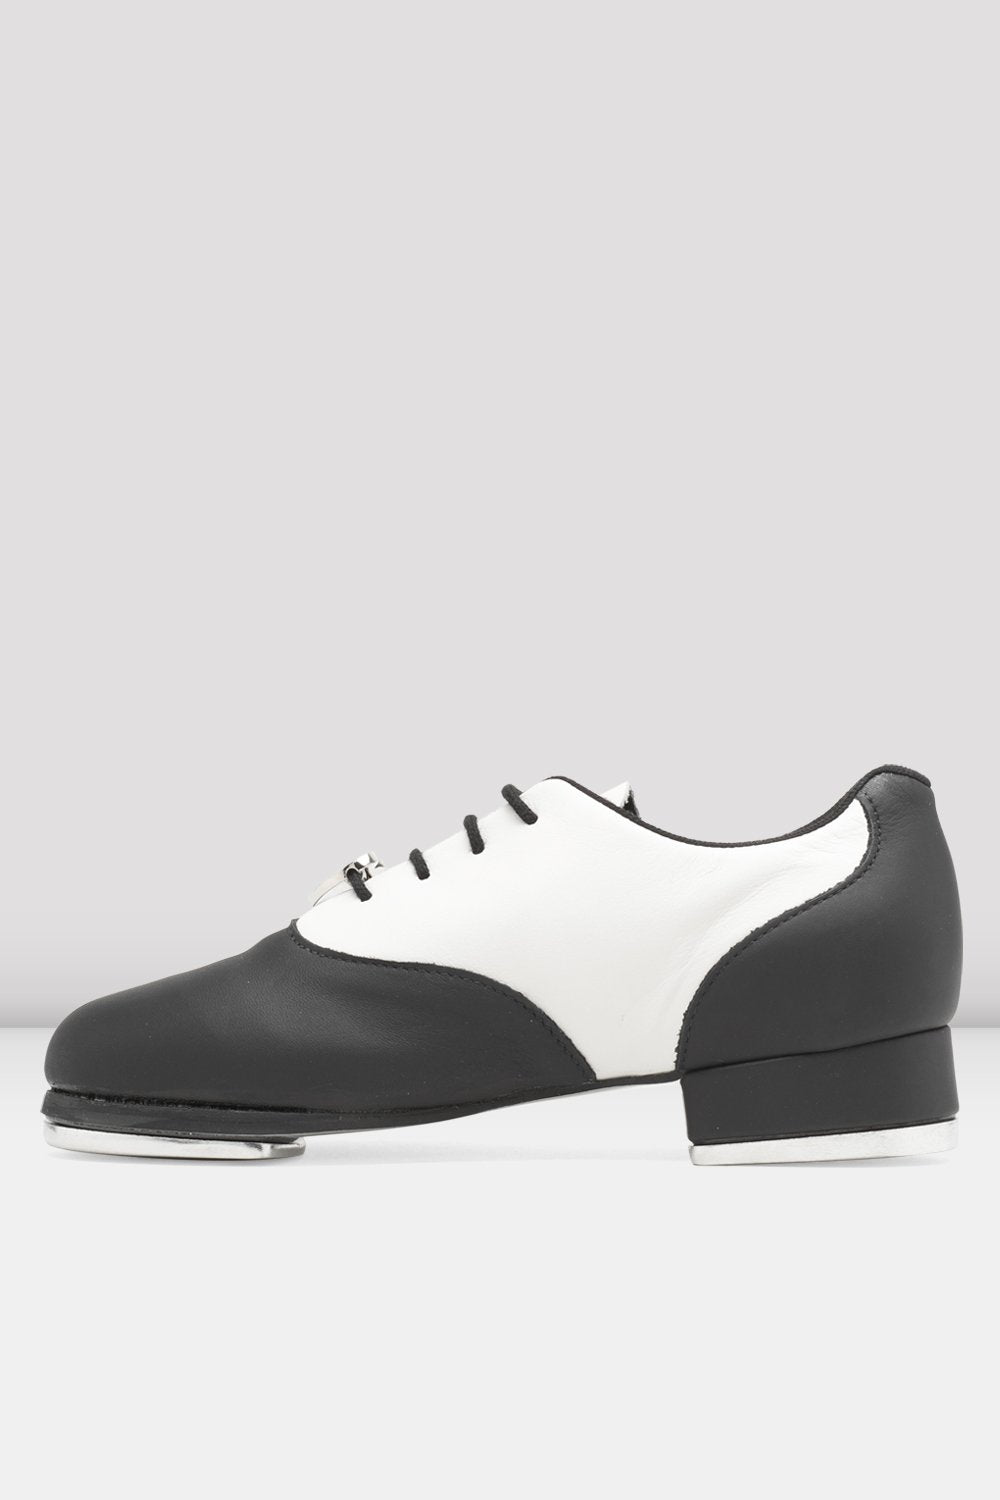 Ladies Chloe And Maud Tap Shoes, Black/White | BLOCH USA – Bloch Dance  Canada